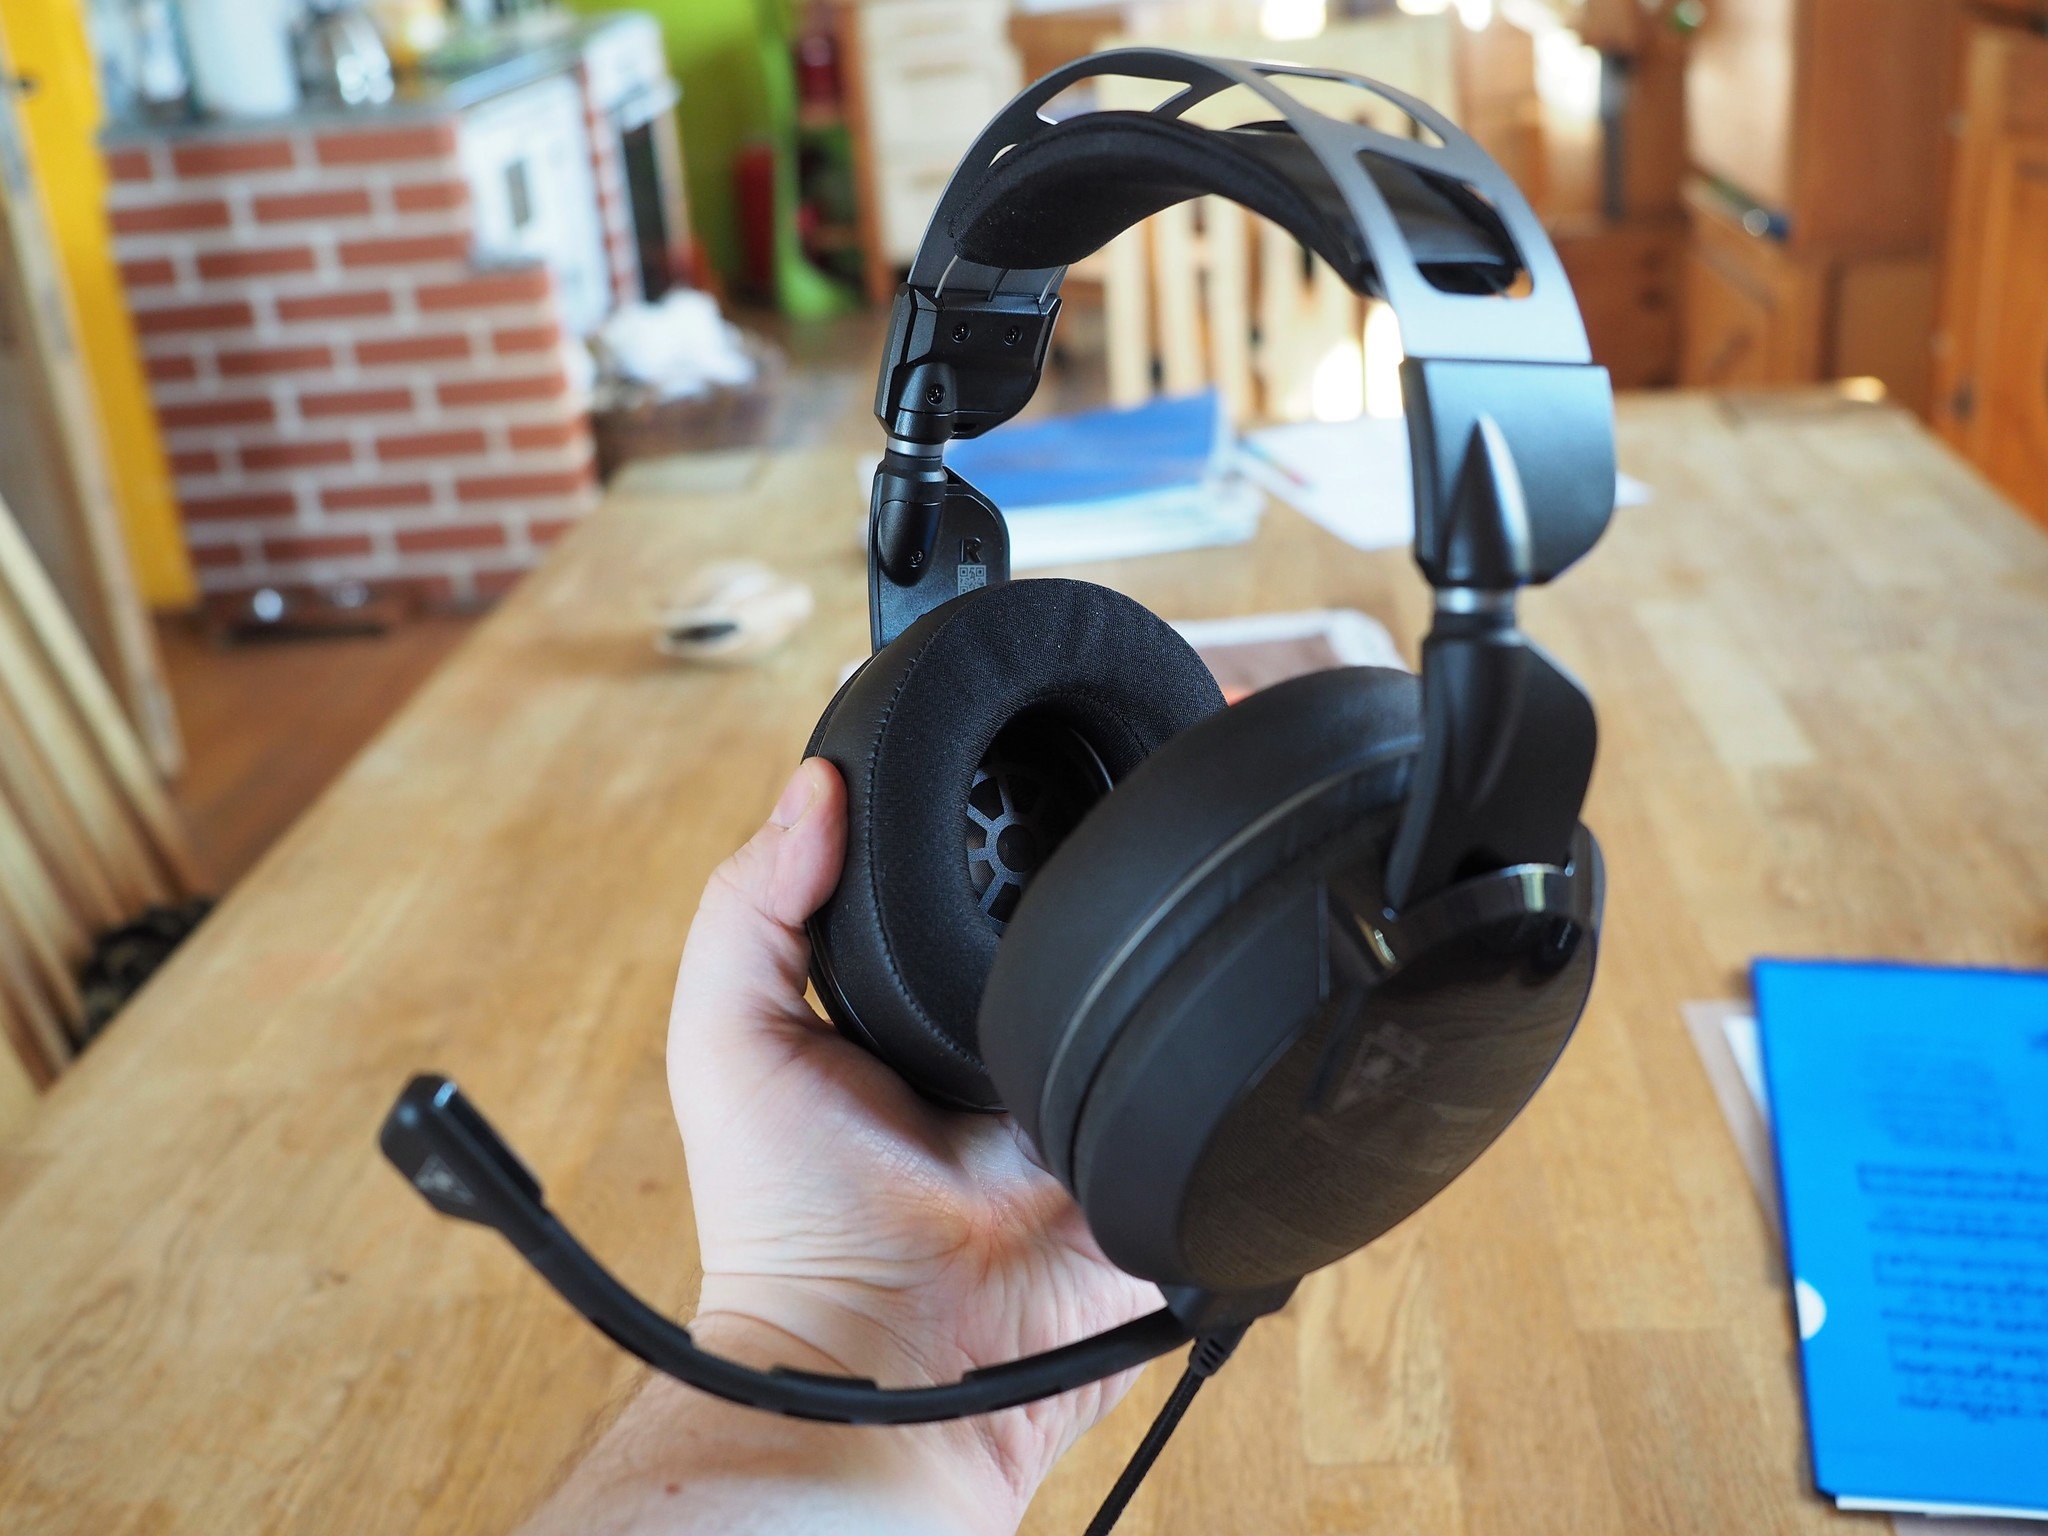 The Turtle Beach Elite Atlas headset it held in an outstretched hand. 